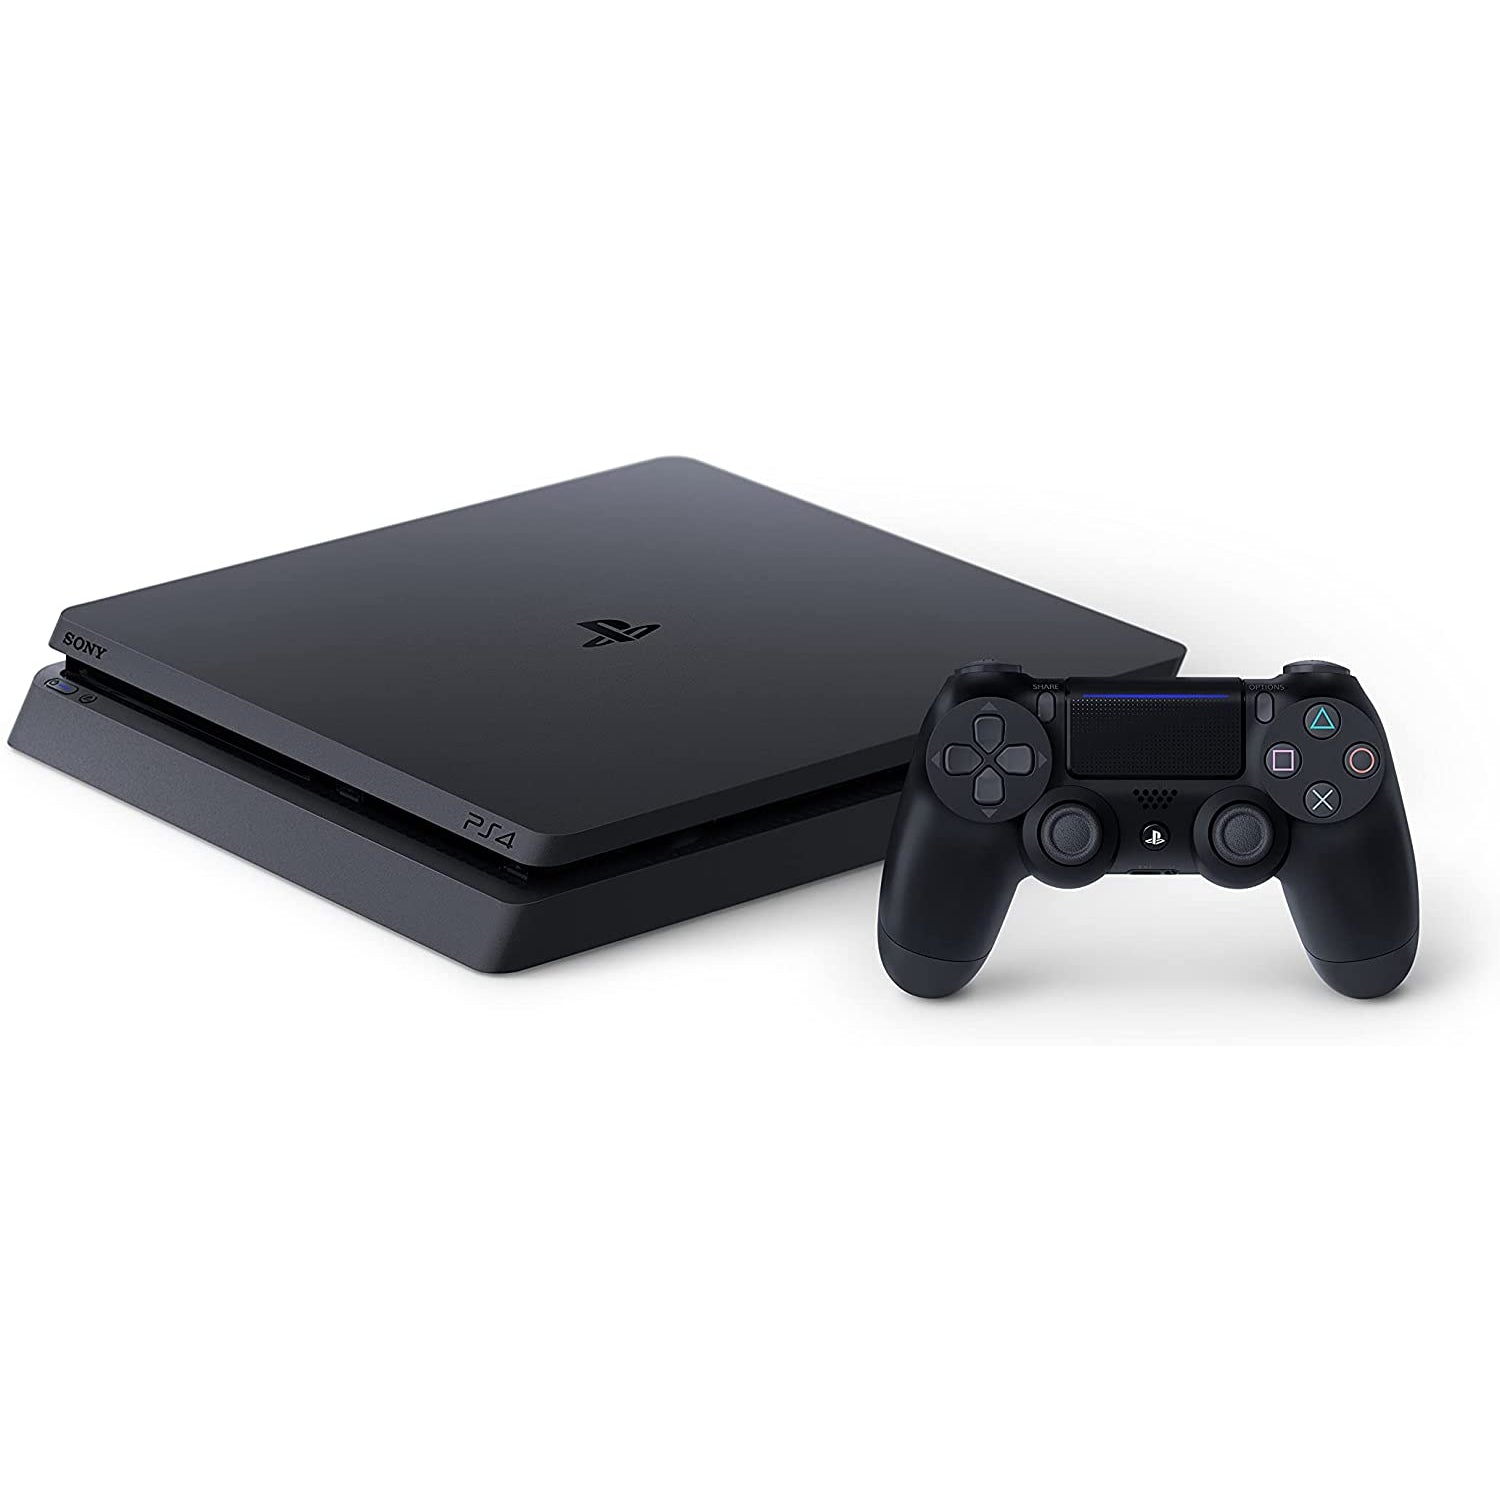 Sony PlayStation 4 Slim Console - 500GB - Refurbished Excellent